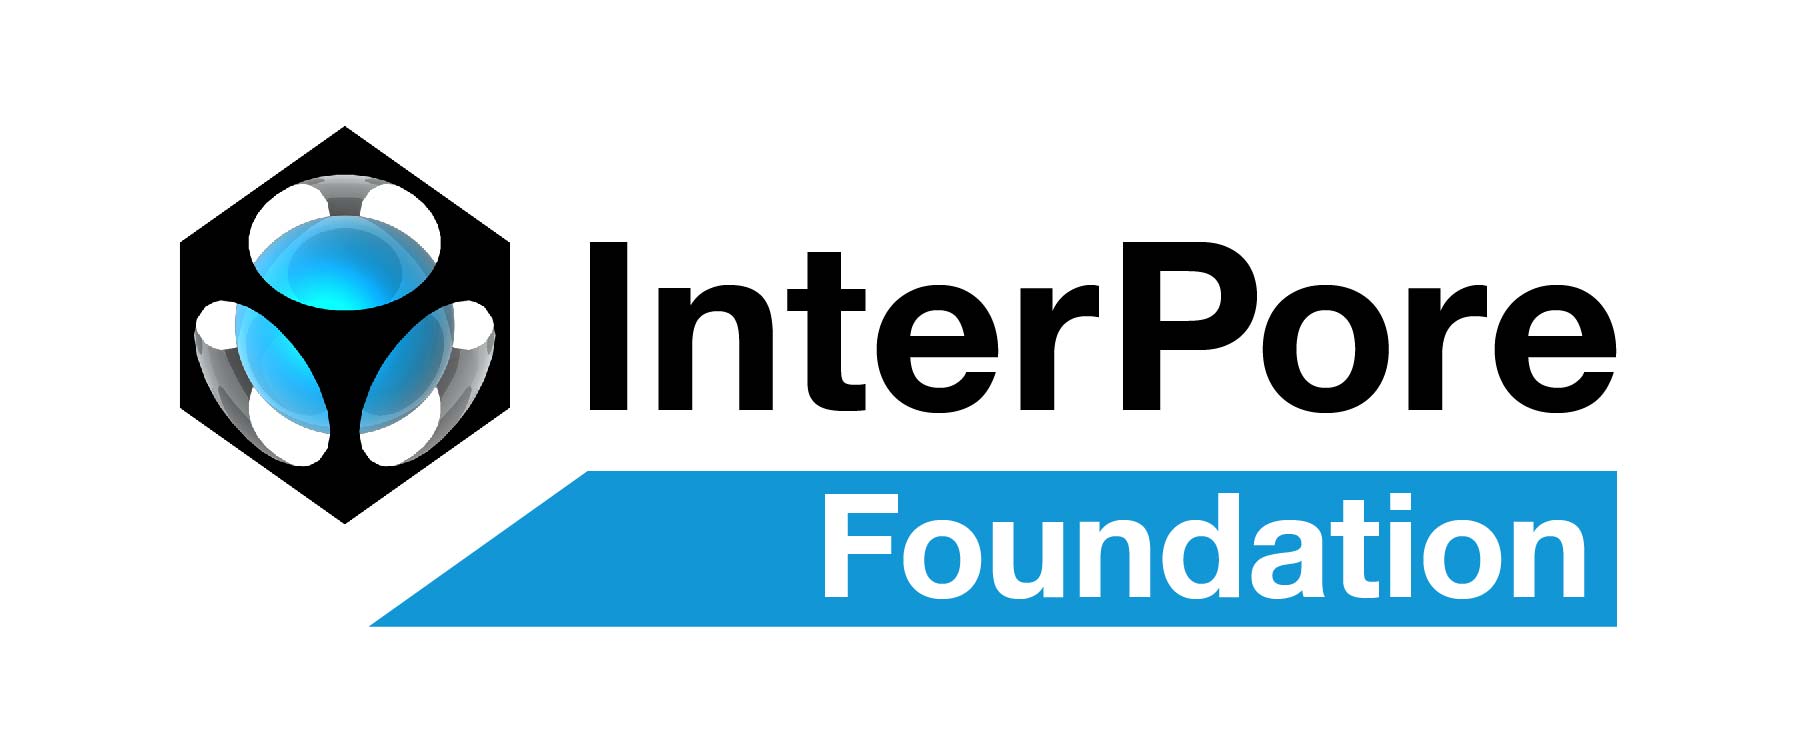 InterPore Foundation s - InterPore Newsletter 2021 (18) featuring funding opportunities for short courses